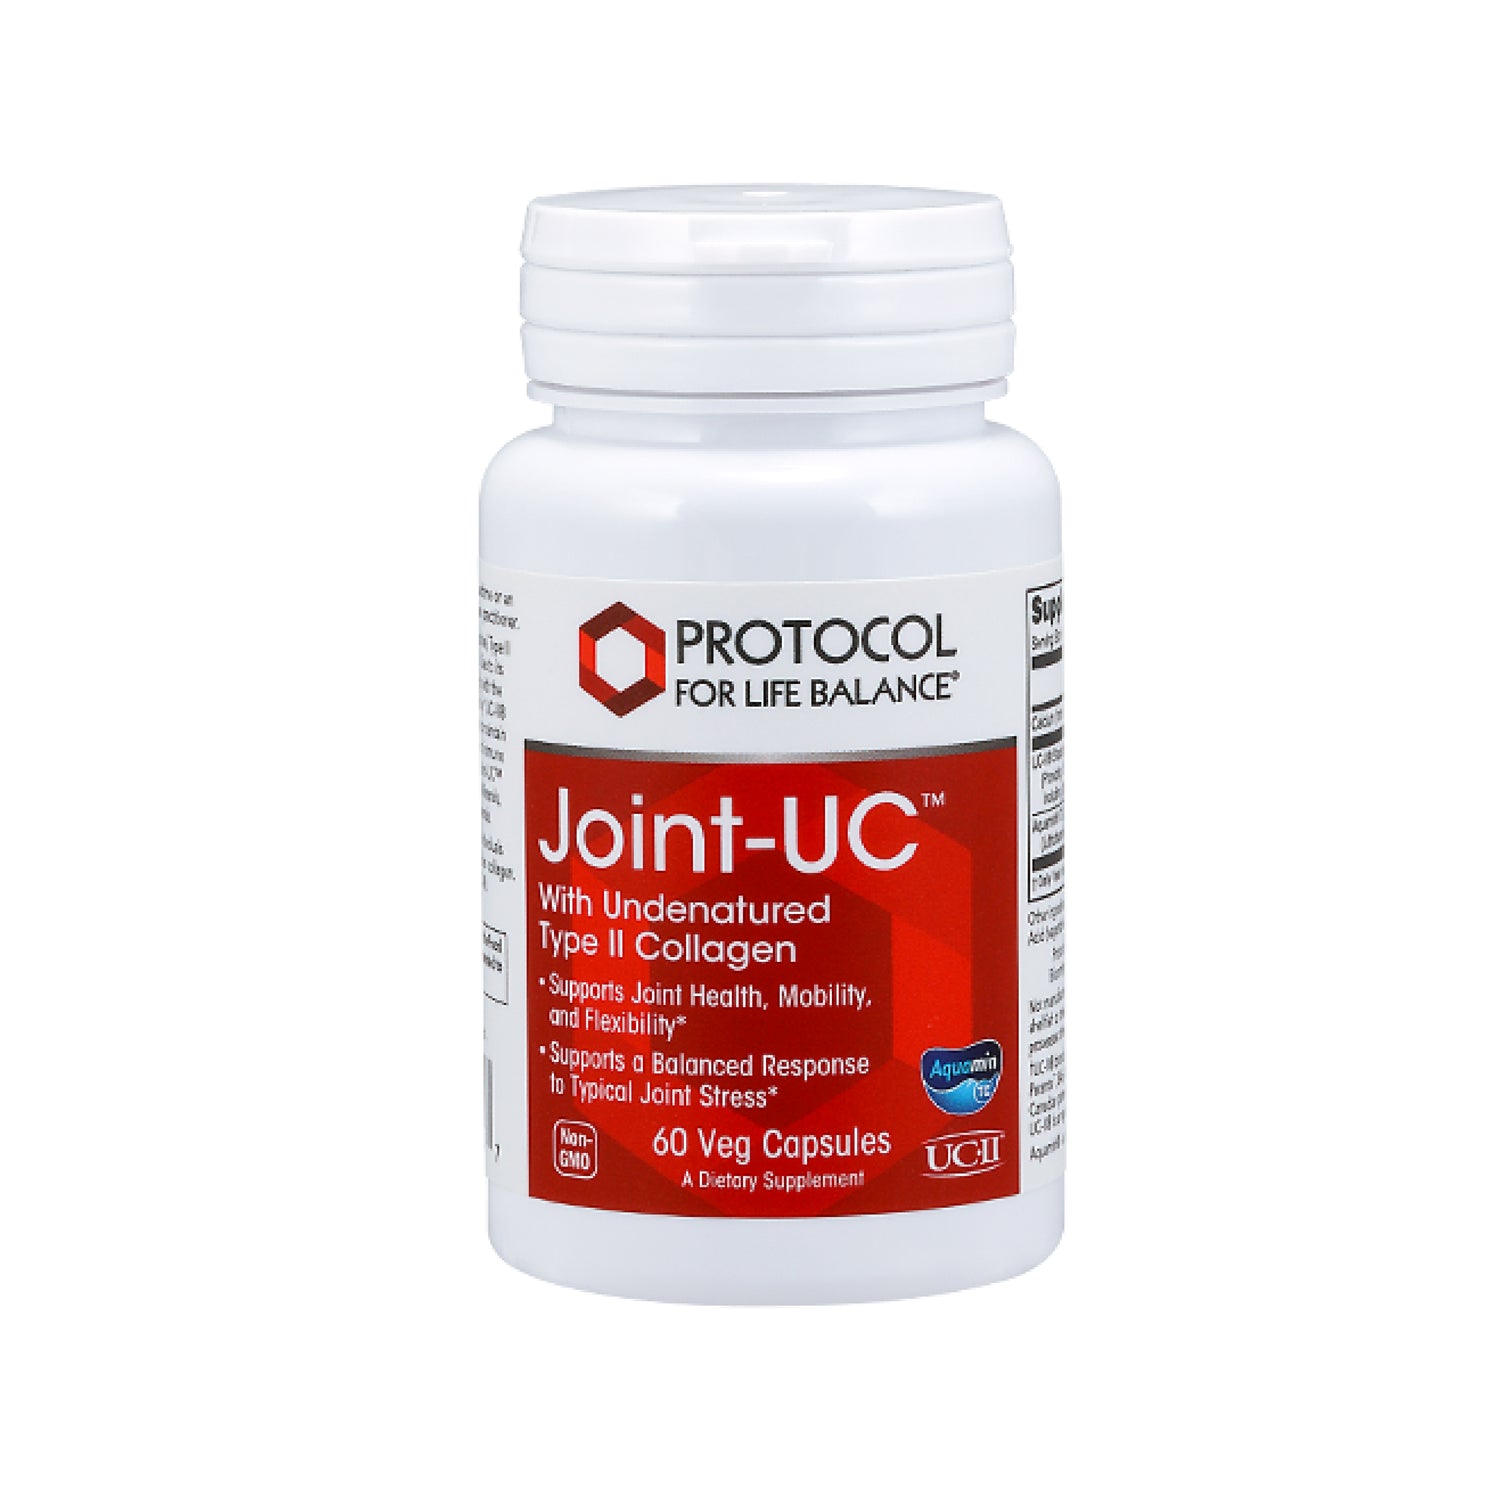 Protocol for Life Balance, Joint-UC, 60 Veg Capsules - Bloom Concept